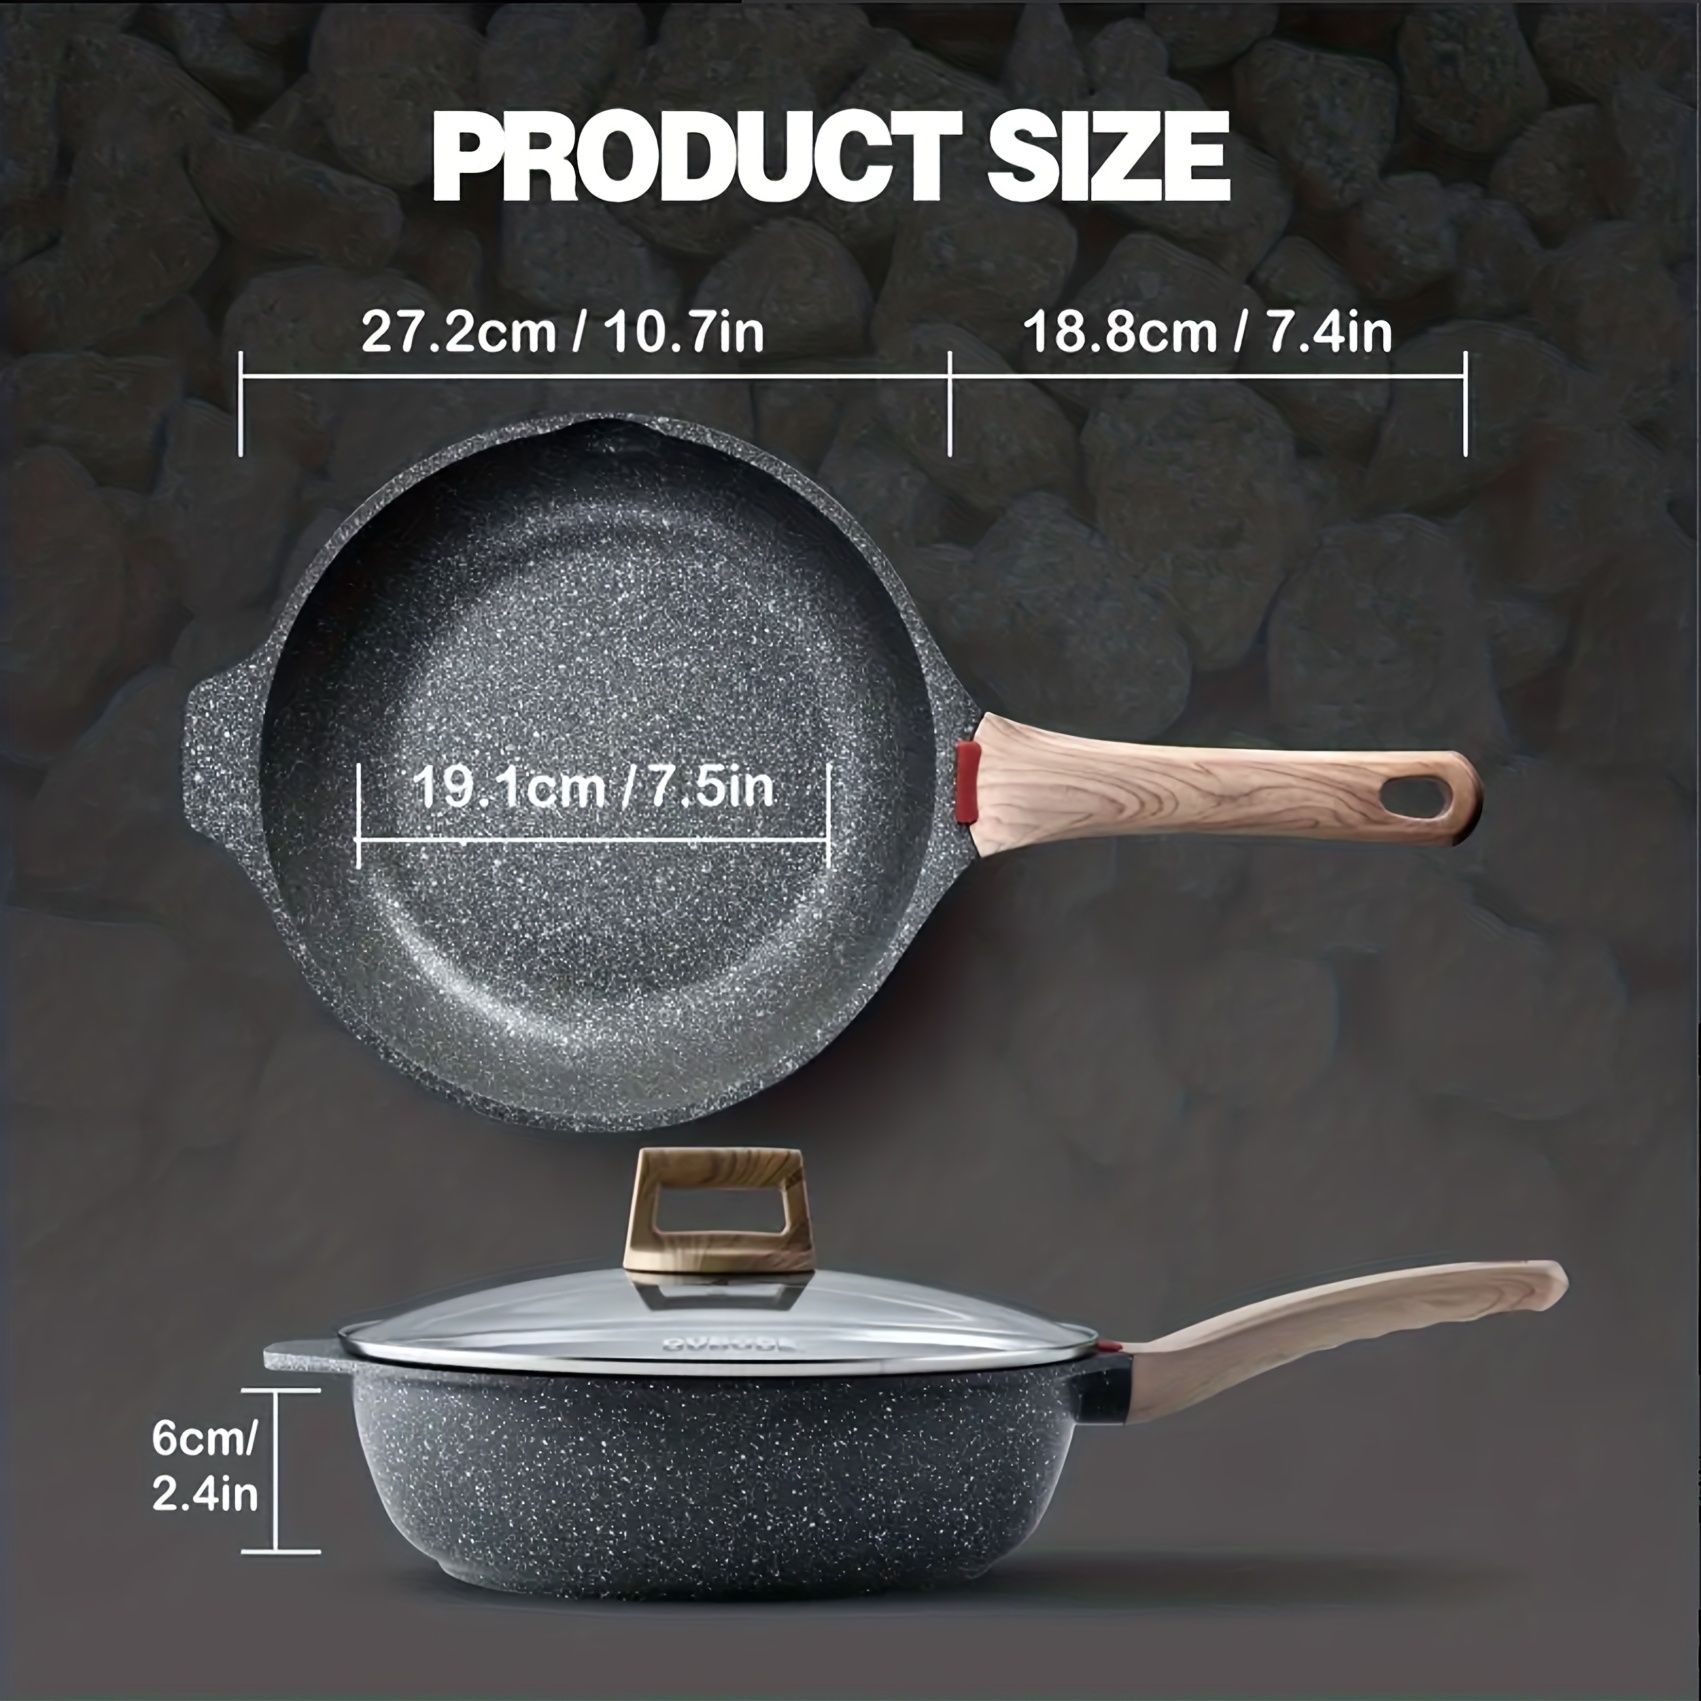 CAROTE Nonstick Frying Pan Skillet,Non Stick Granite Fry Pan Egg Pan Omelet  Pans, Stone Cookware Chef's Pan, PFOA Free,Induction Compatible(Classic